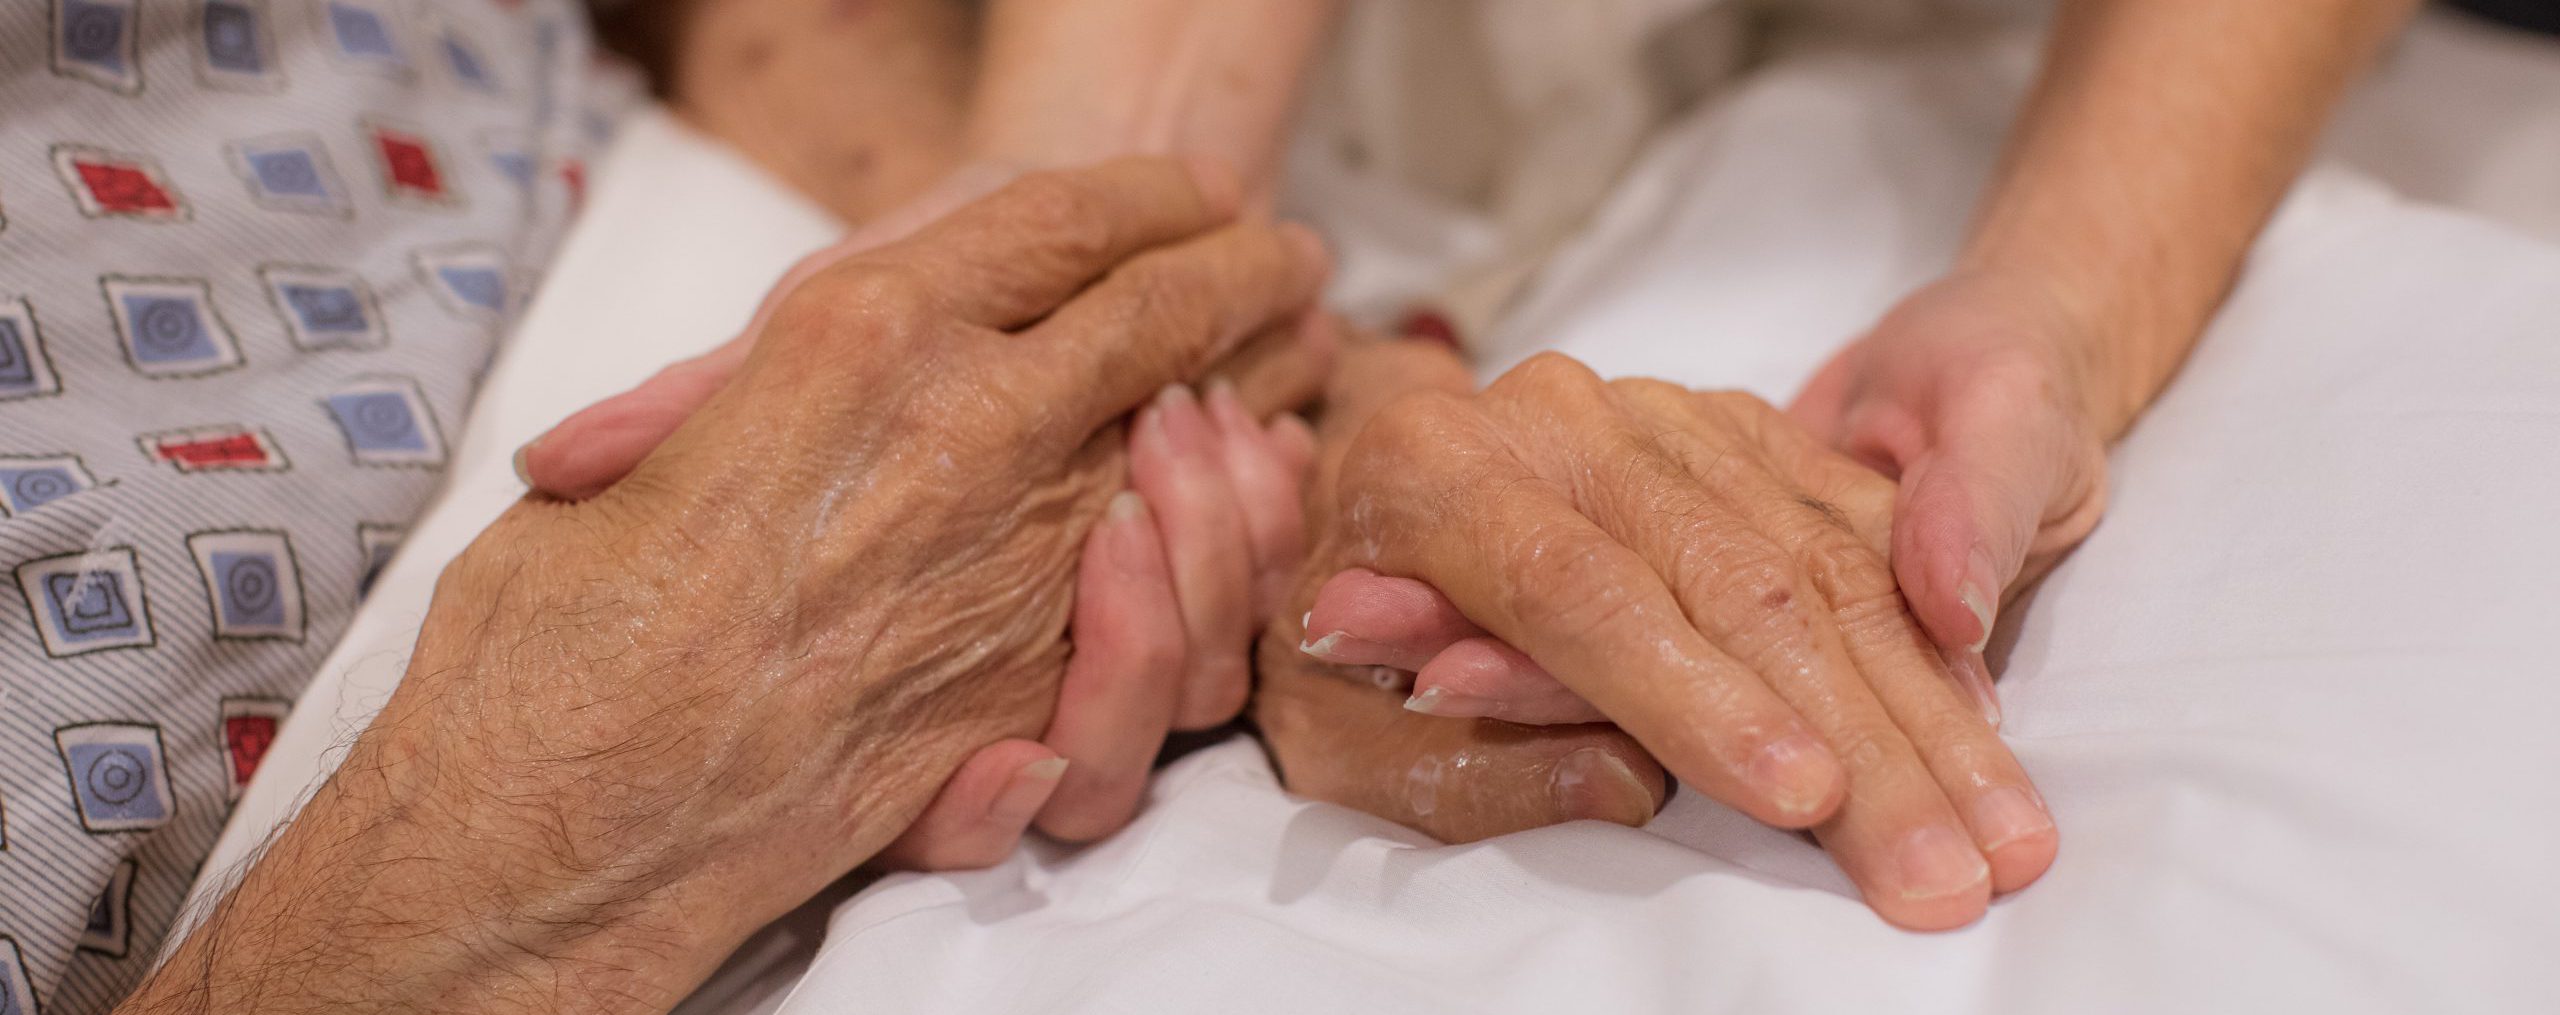 A close-up of an elderly person’s hands being gently held by a caregiver’s hands, symbolizing compassion, care, and support. The elderly person is wearing a patterned garment, and both are resting on a white bed.